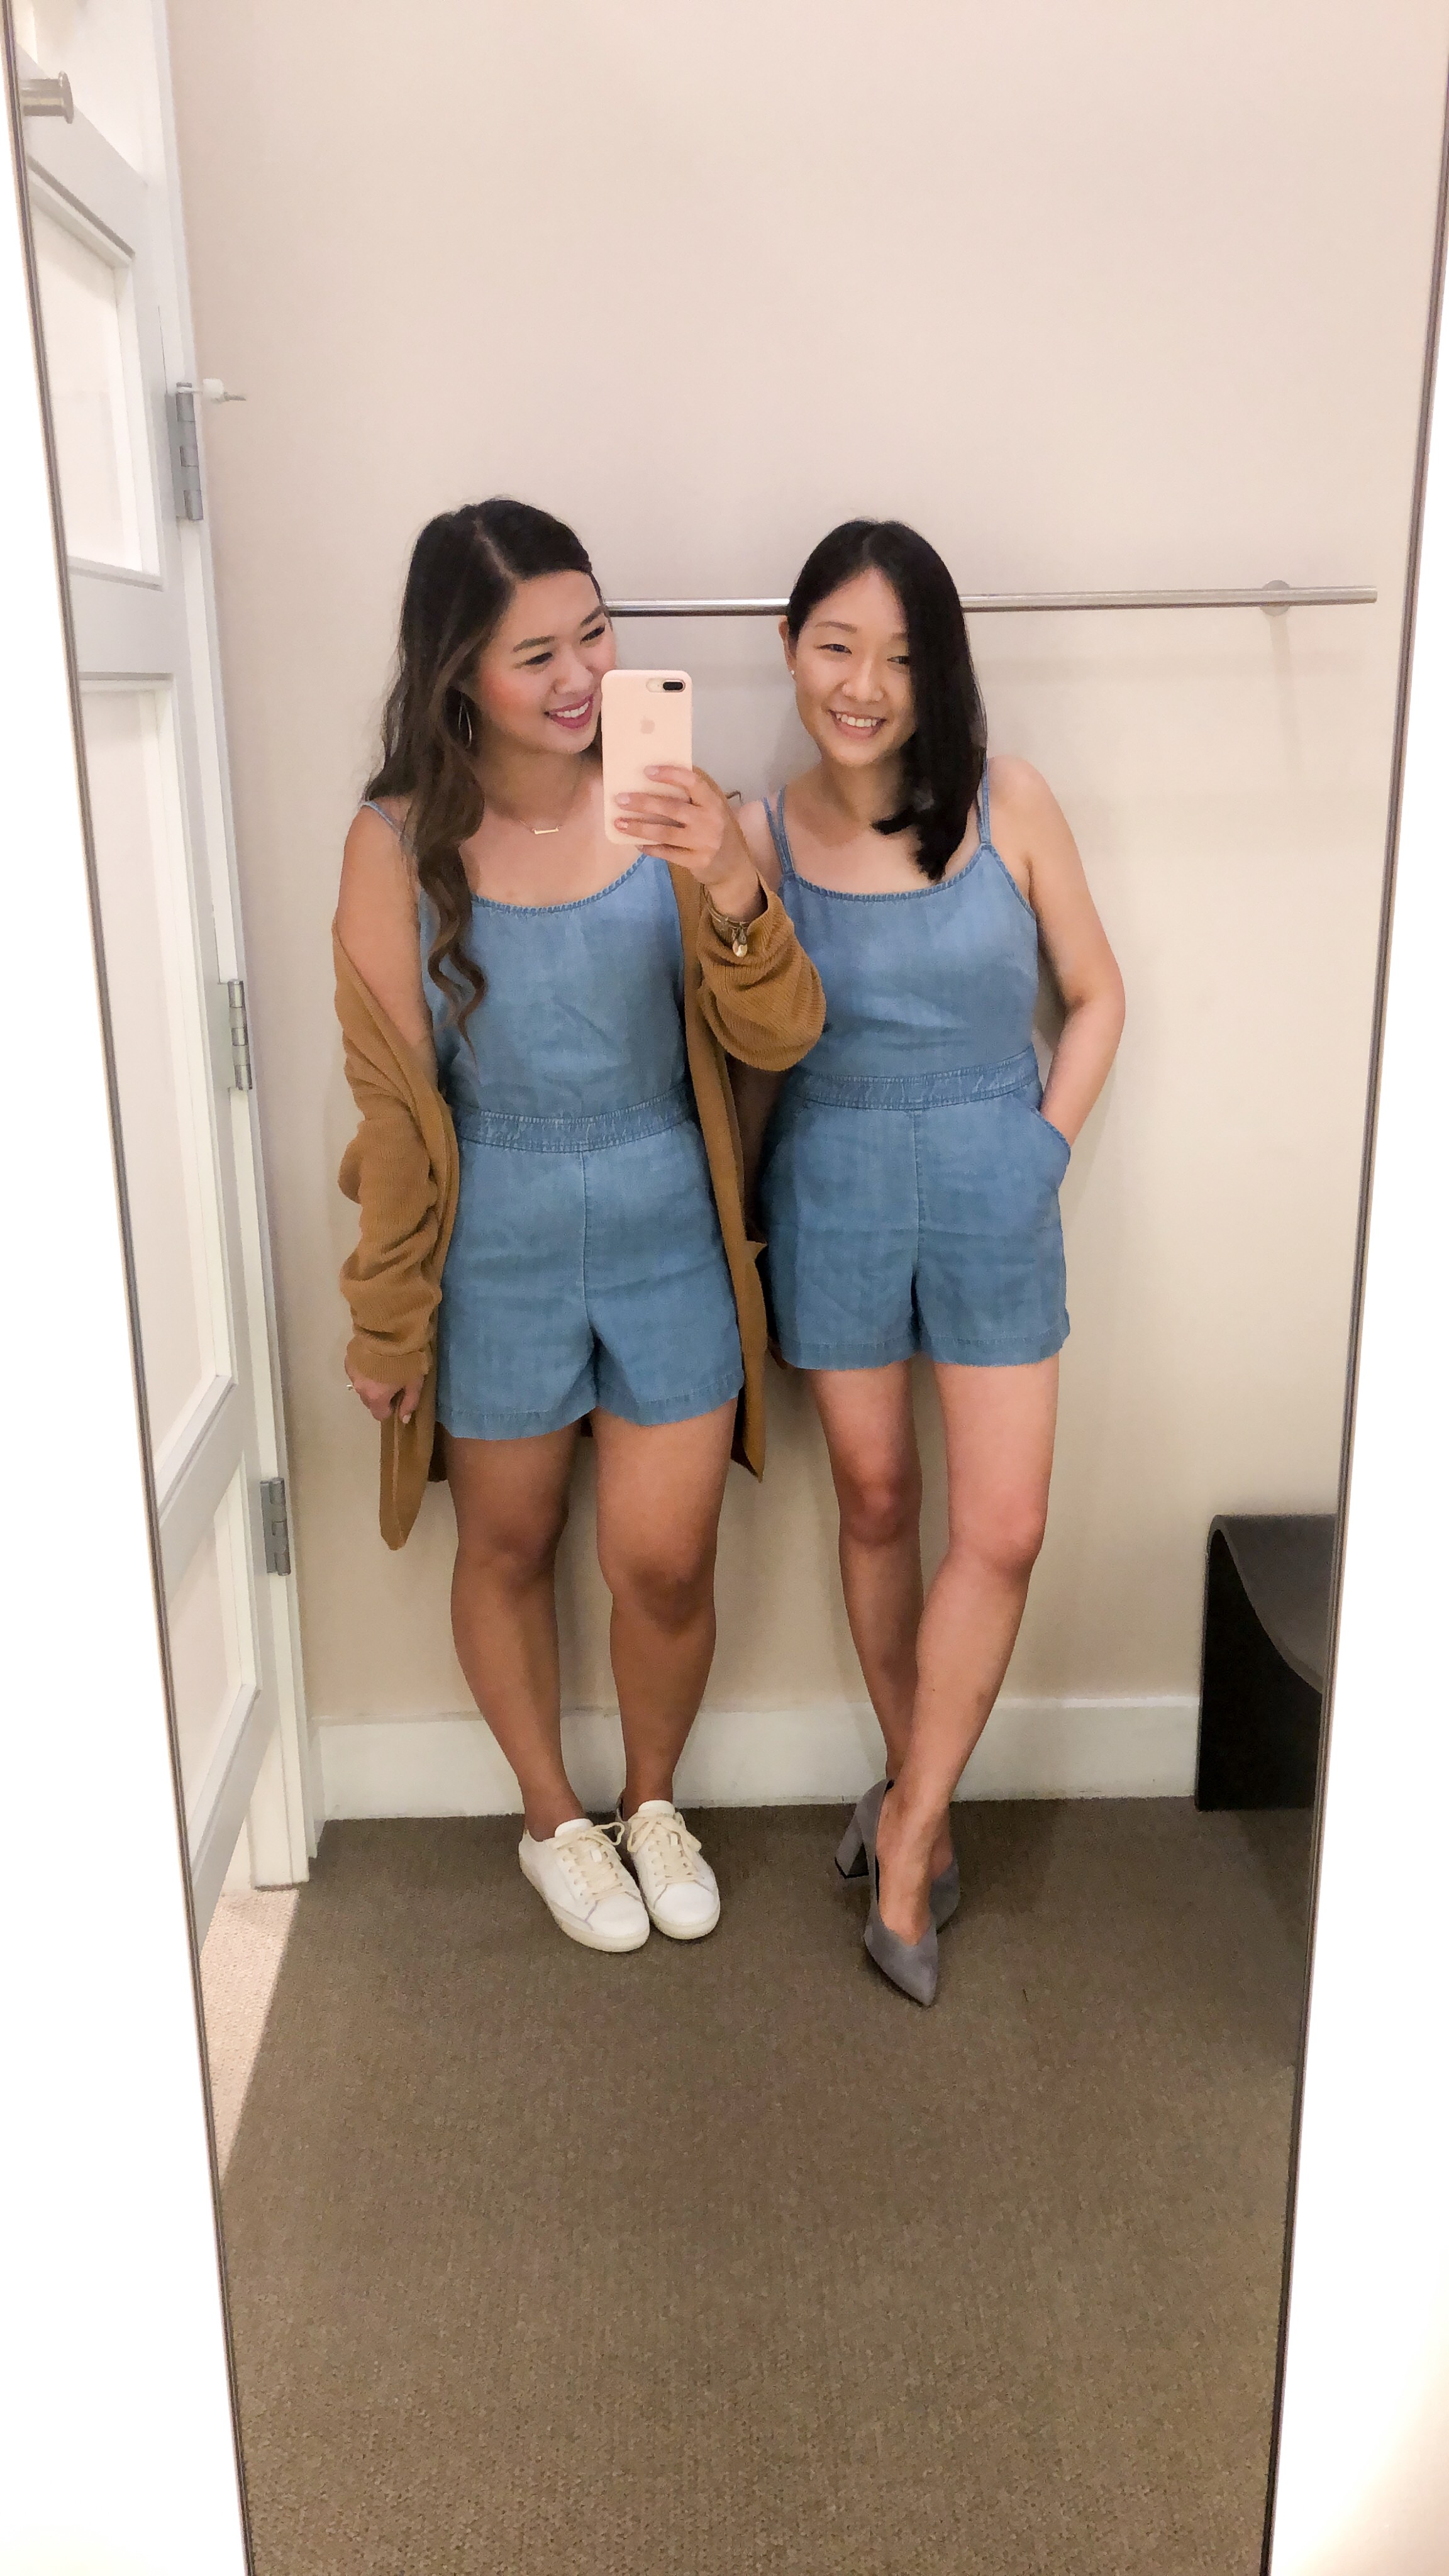 Sale Alert: 40% off at LOFT + New Try-Ons & Reviews - what jess